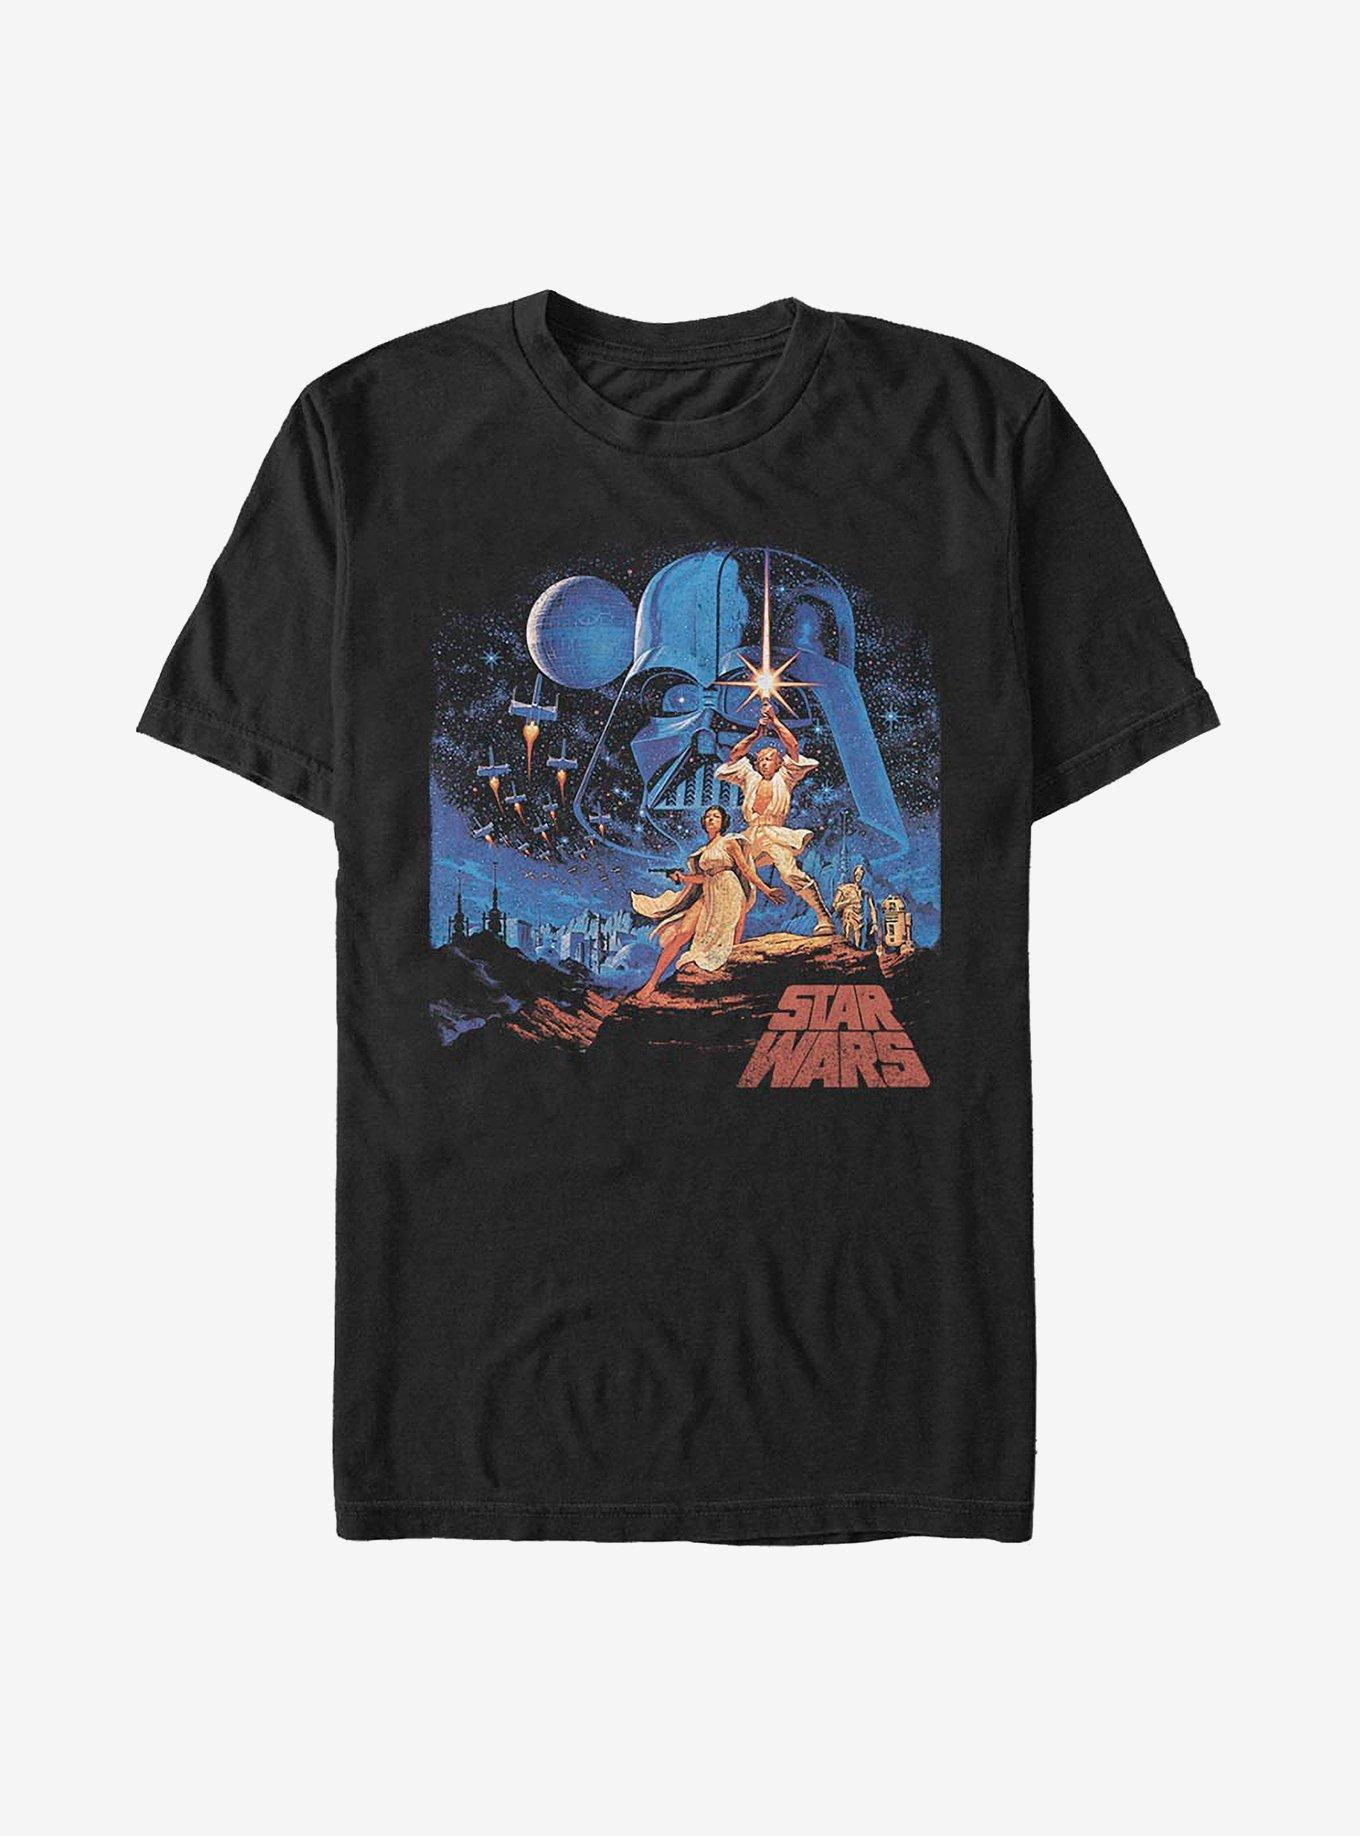 Star Wars All The T-Shirt